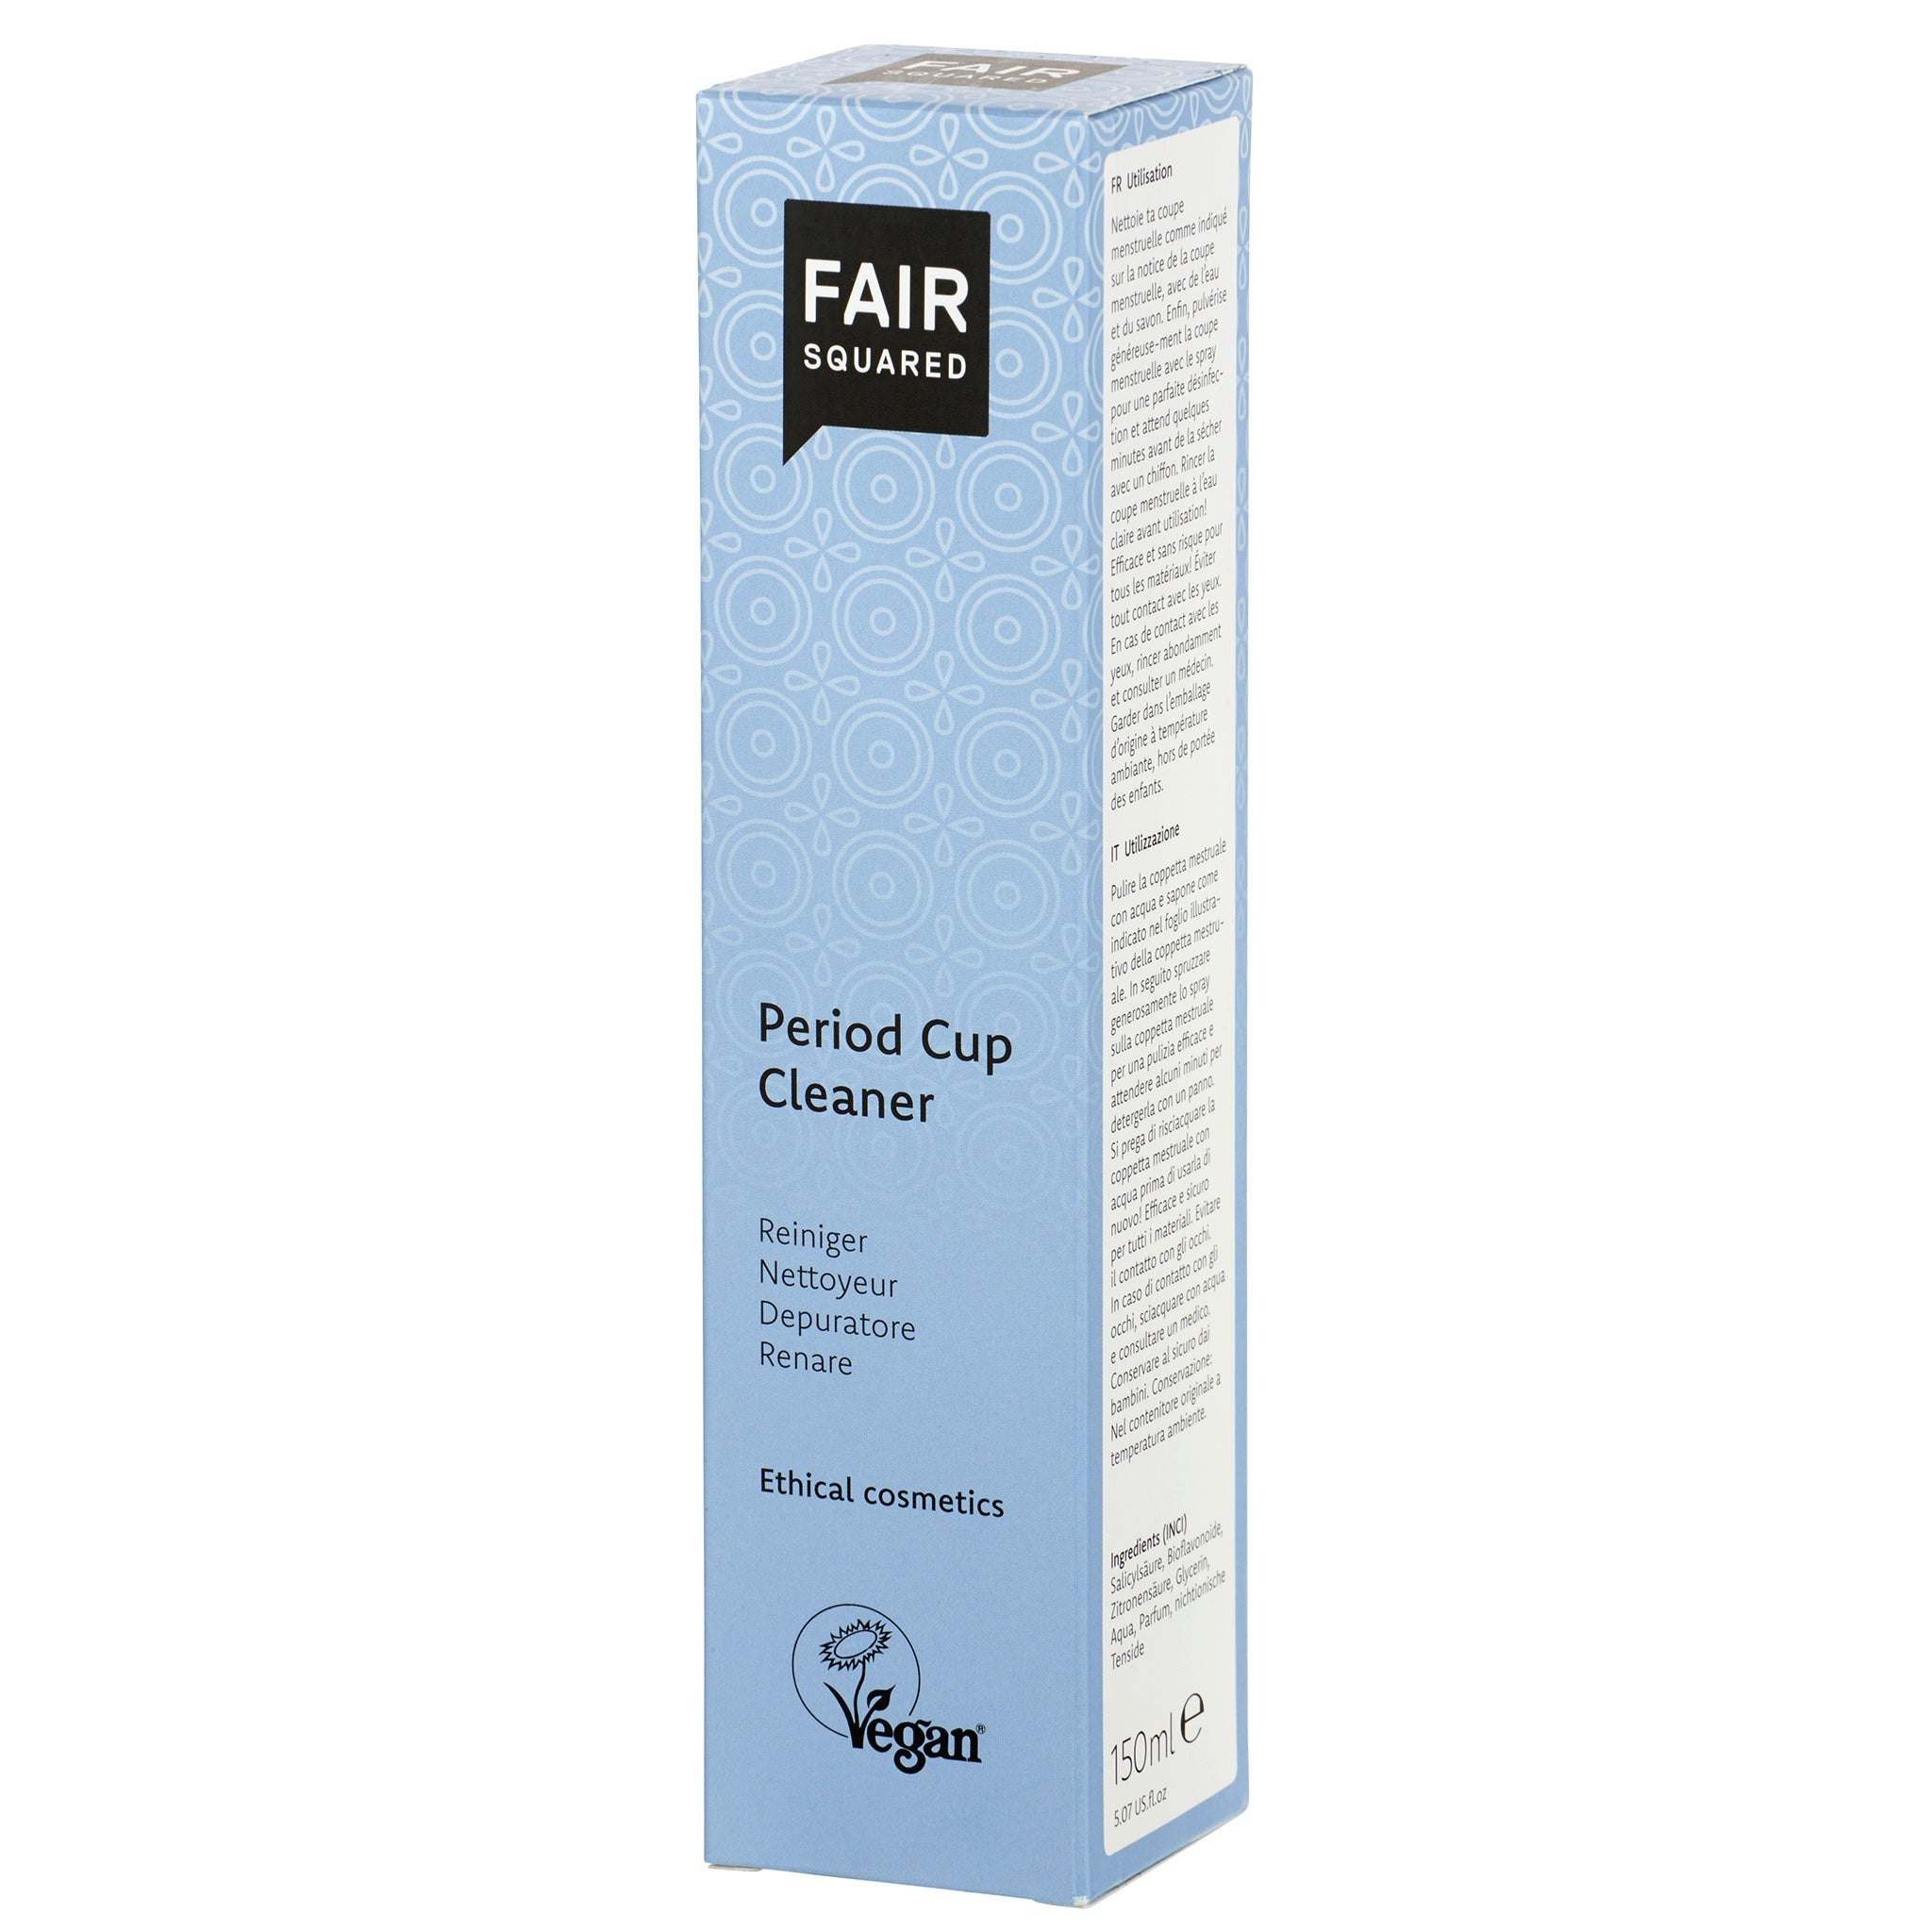 Period Cup Cleaner - mypure.co.uk